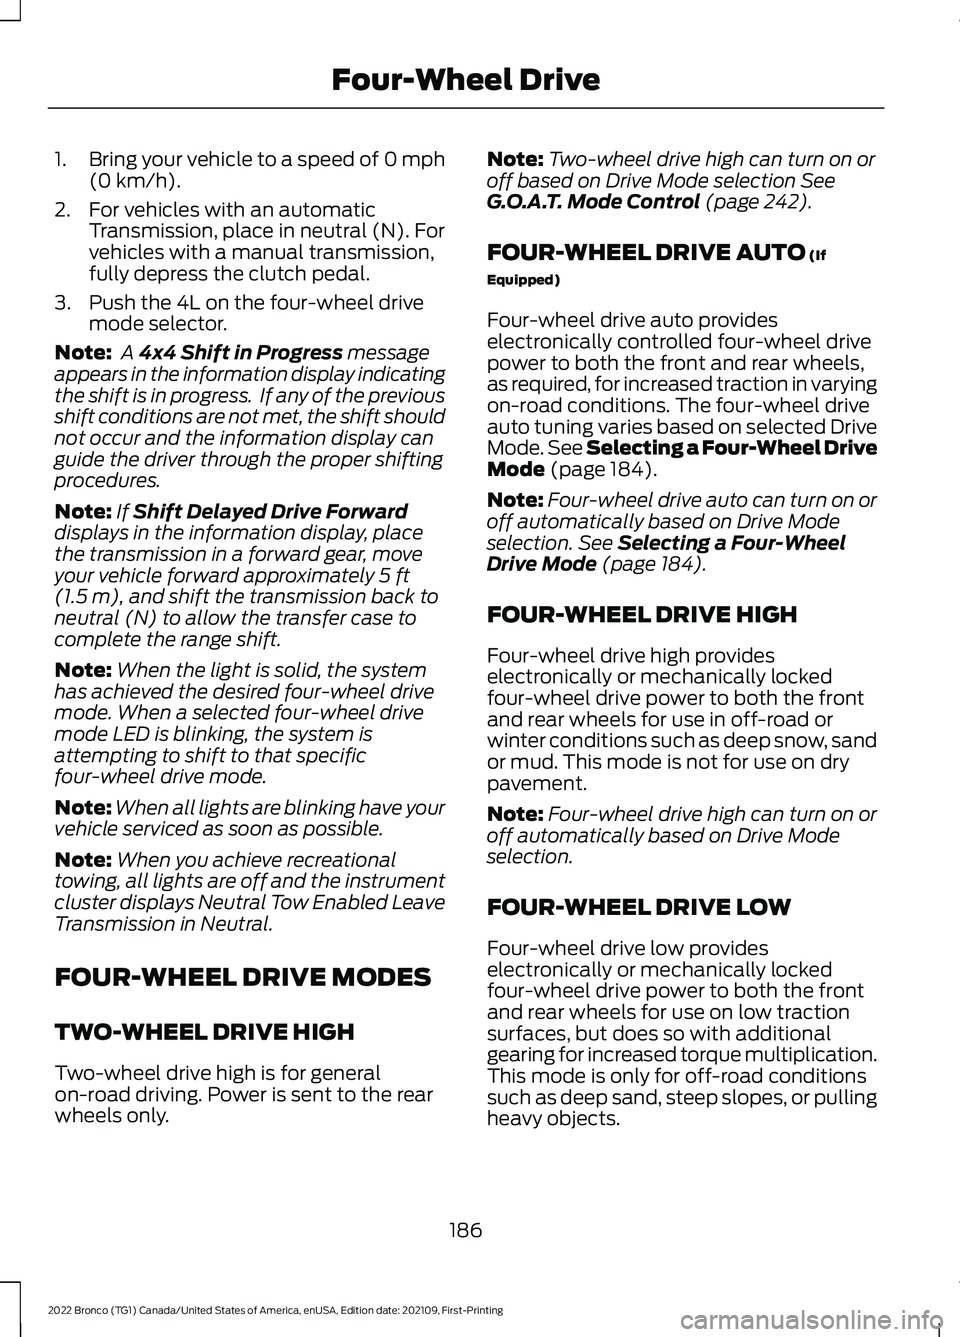 FORD BRONCO 2022 Service Manual 1.Bring your vehicle to a speed of 0 mph(0 km/h).
2.For vehicles with an automaticTransmission, place in neutral (N). Forvehicles with a manual transmission,fully depress the clutch pedal.
3.Push the 